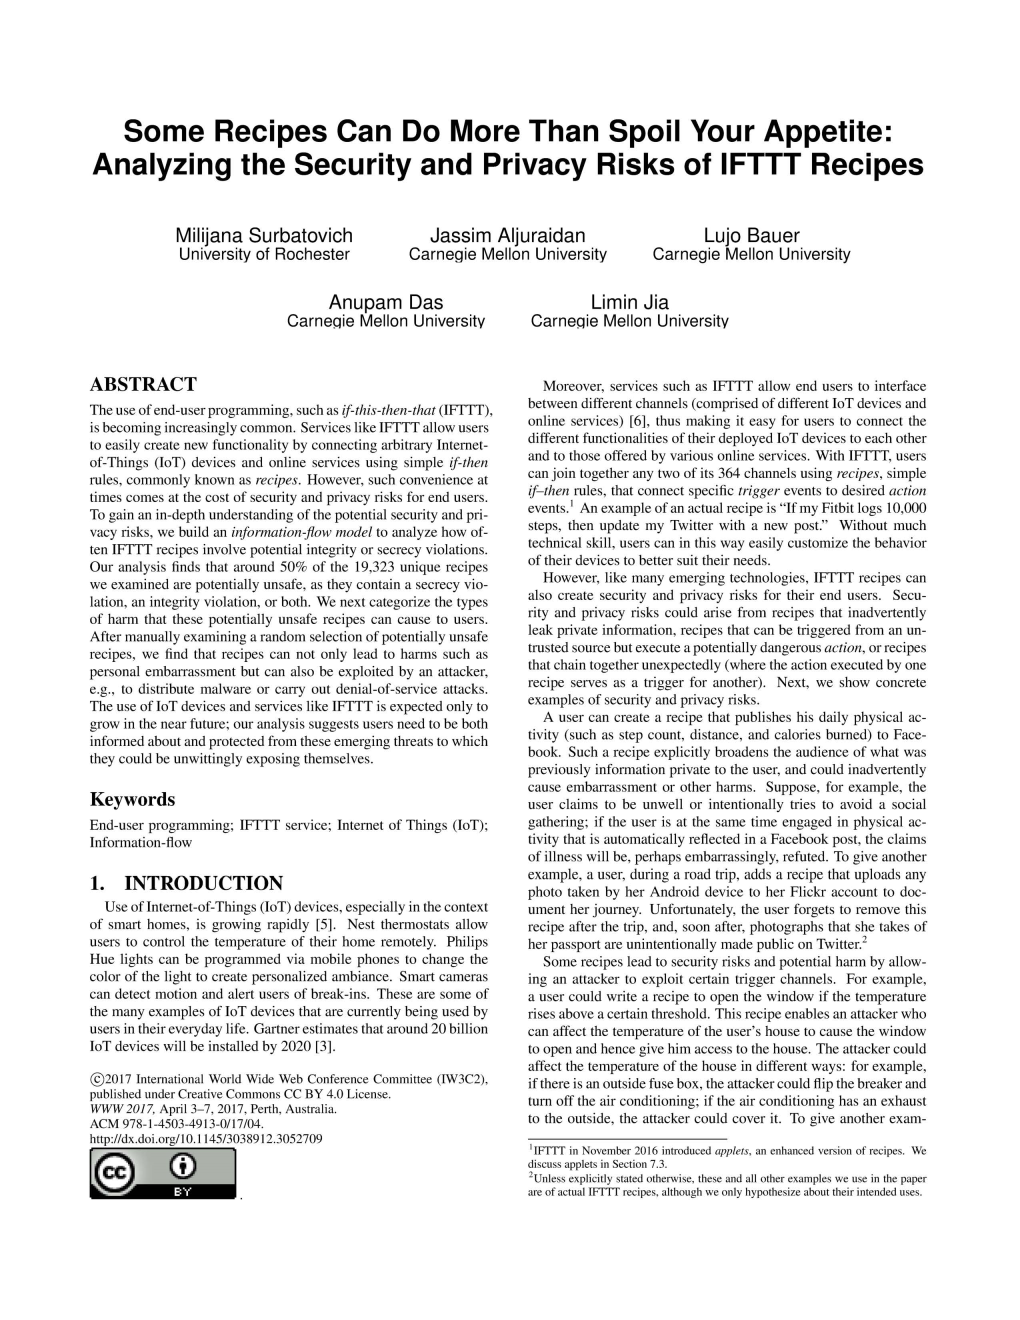 Analyzing the Security and Privacy Risks of IFTTT Recipes